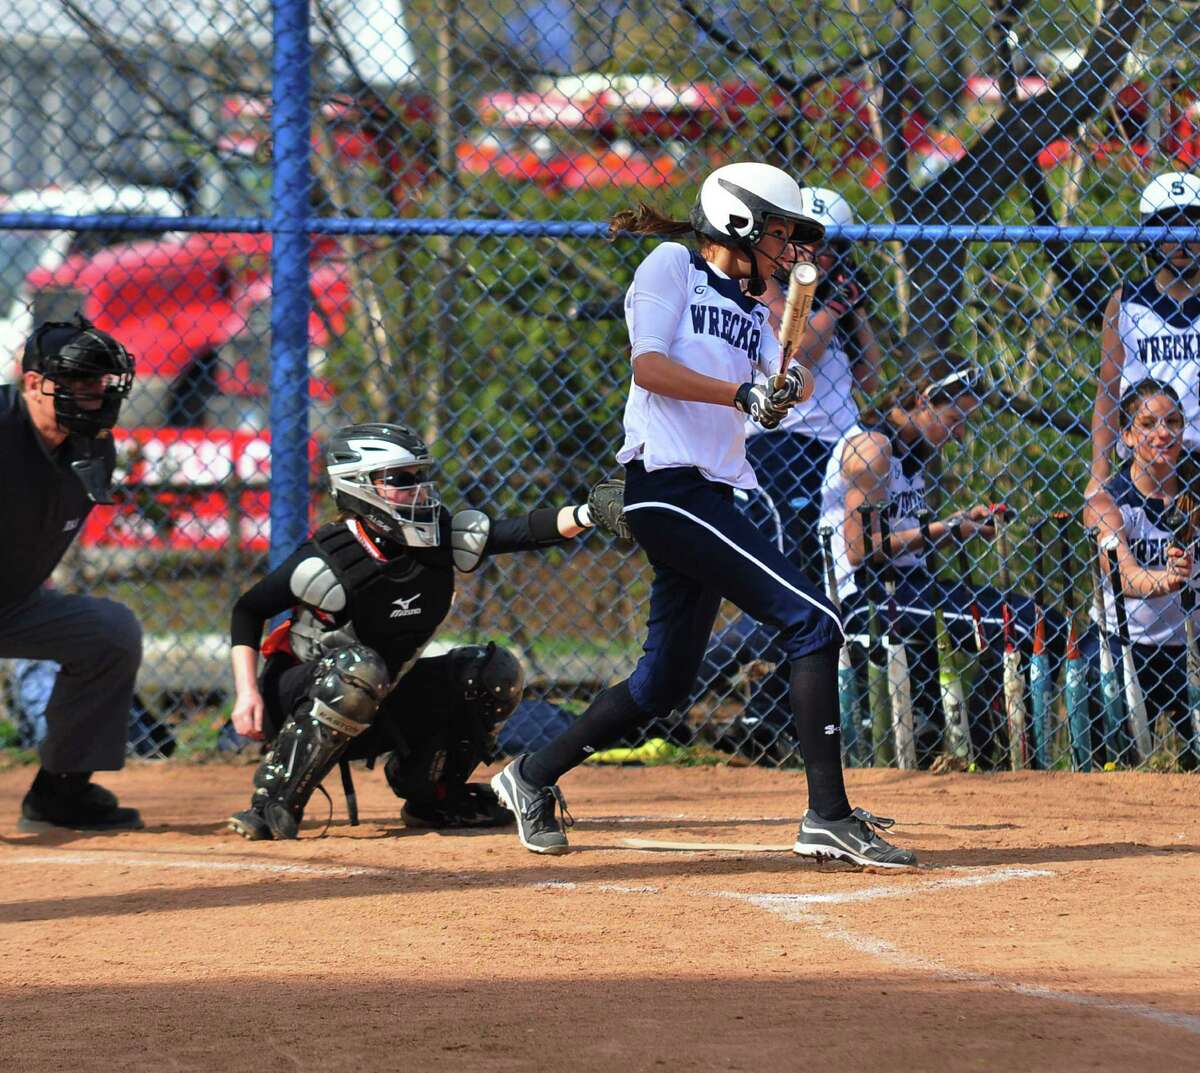 Staples' Nikki Bukovsky swings at a pitch earlier in the year. Bukovsky hit a home run and was 3-for-4 at the plate Friday in a 16-4 home loss to St. Joseph.